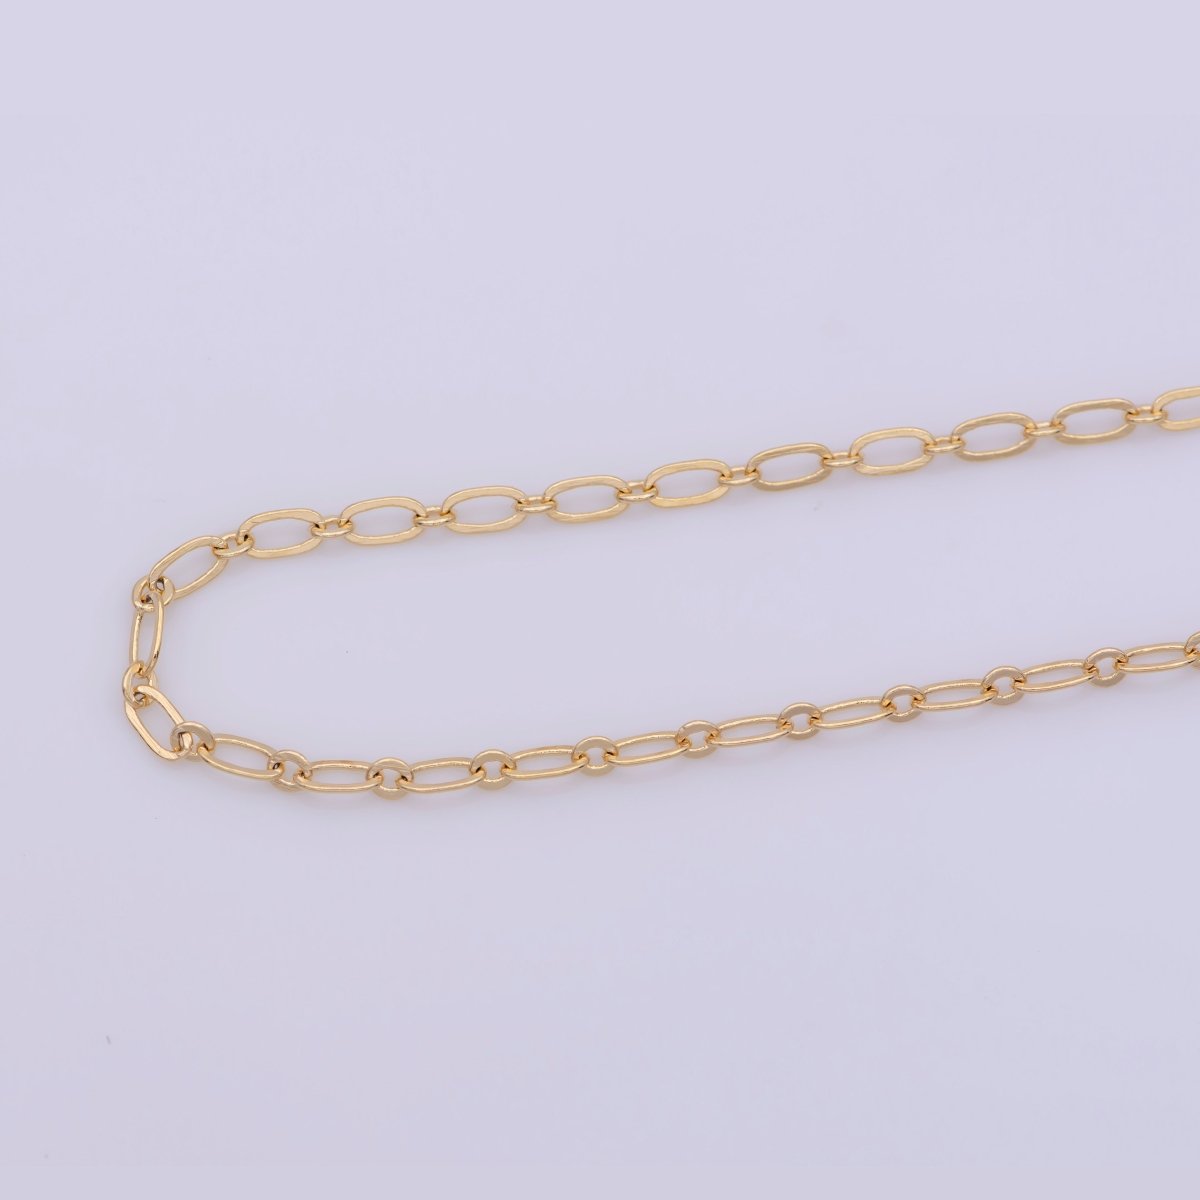 17.5 inch Rolo Chain Necklace, 18K Gold Plated Rolo Finished Chain Necklace For Jewelry Making, Dainty 2.5mm Rolo Necklace w/ Spring Ring | CN-367 - DLUXCA